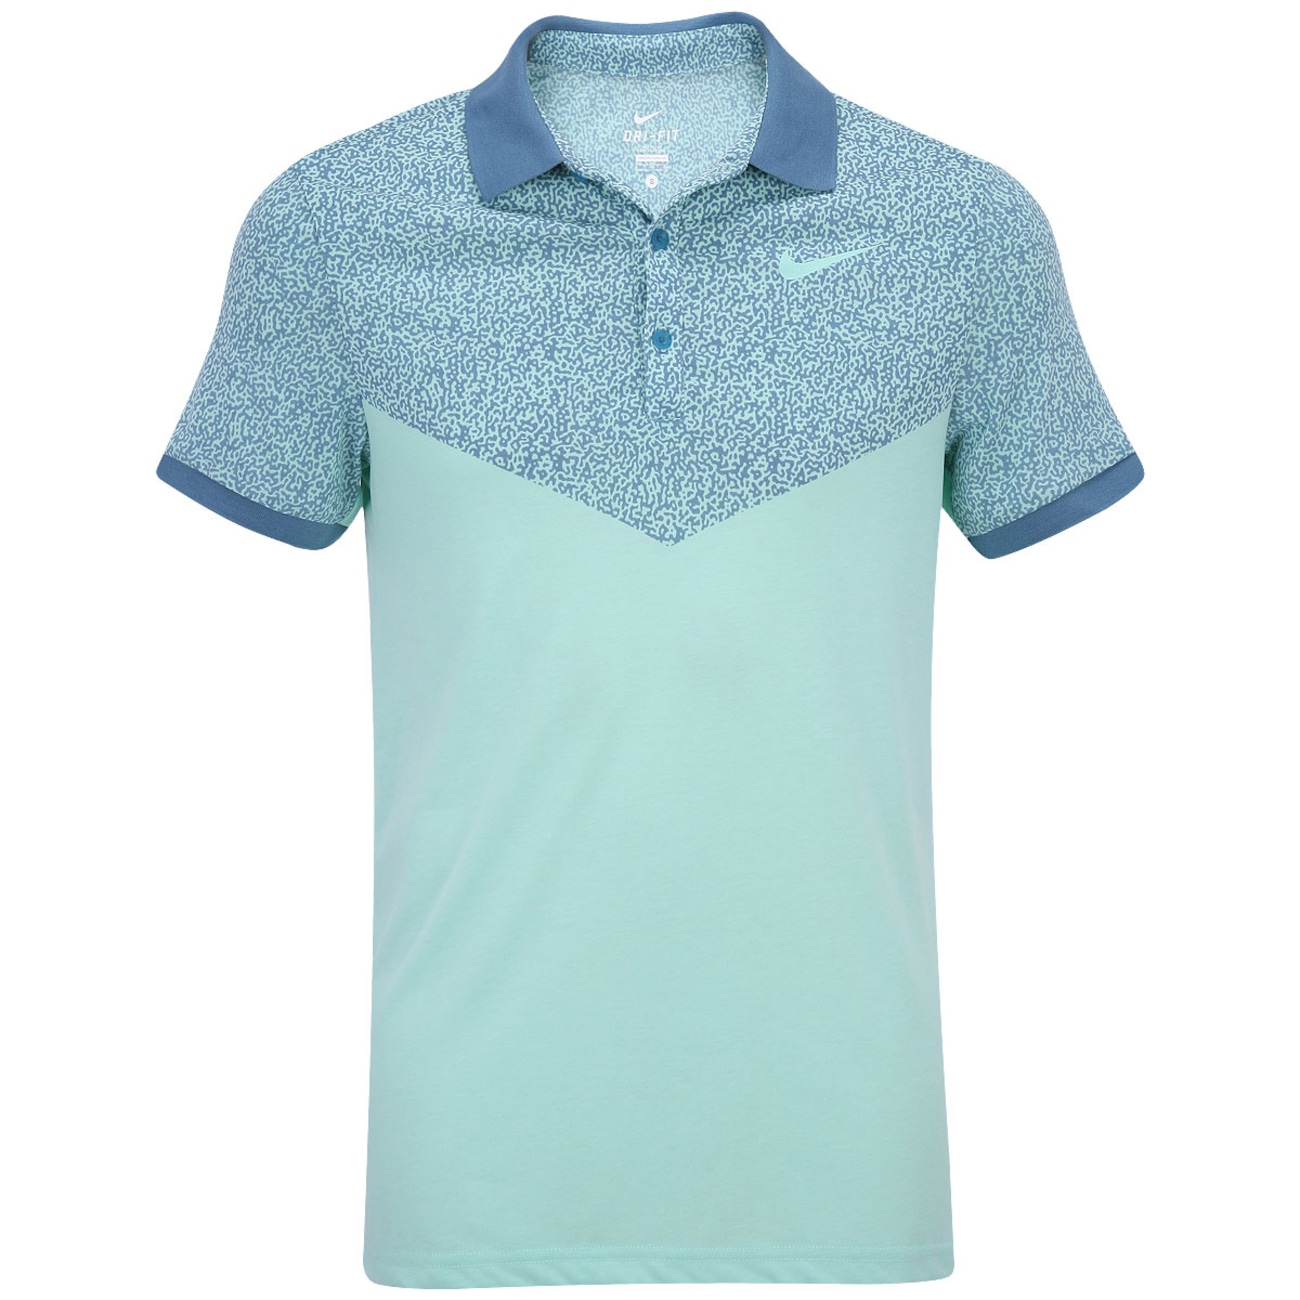 camisa polo nike dry fit